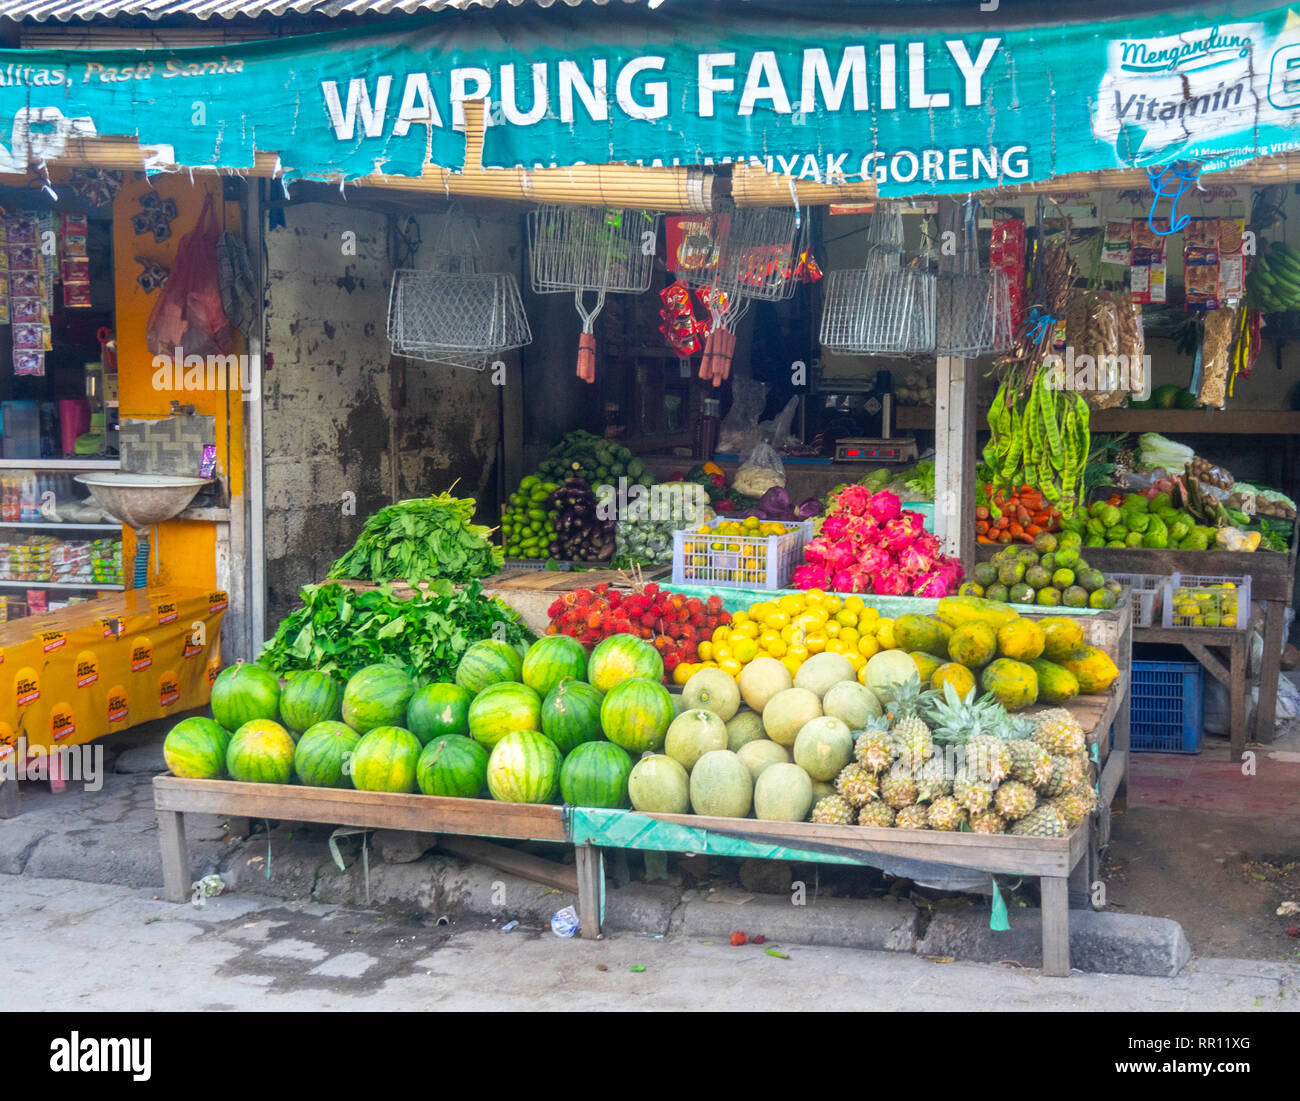 Shop in markets selling fruit, melons, dragon fruit, paw paw, pineapples, in Jimbaran Bay Bali Indonesia. Stock Photo